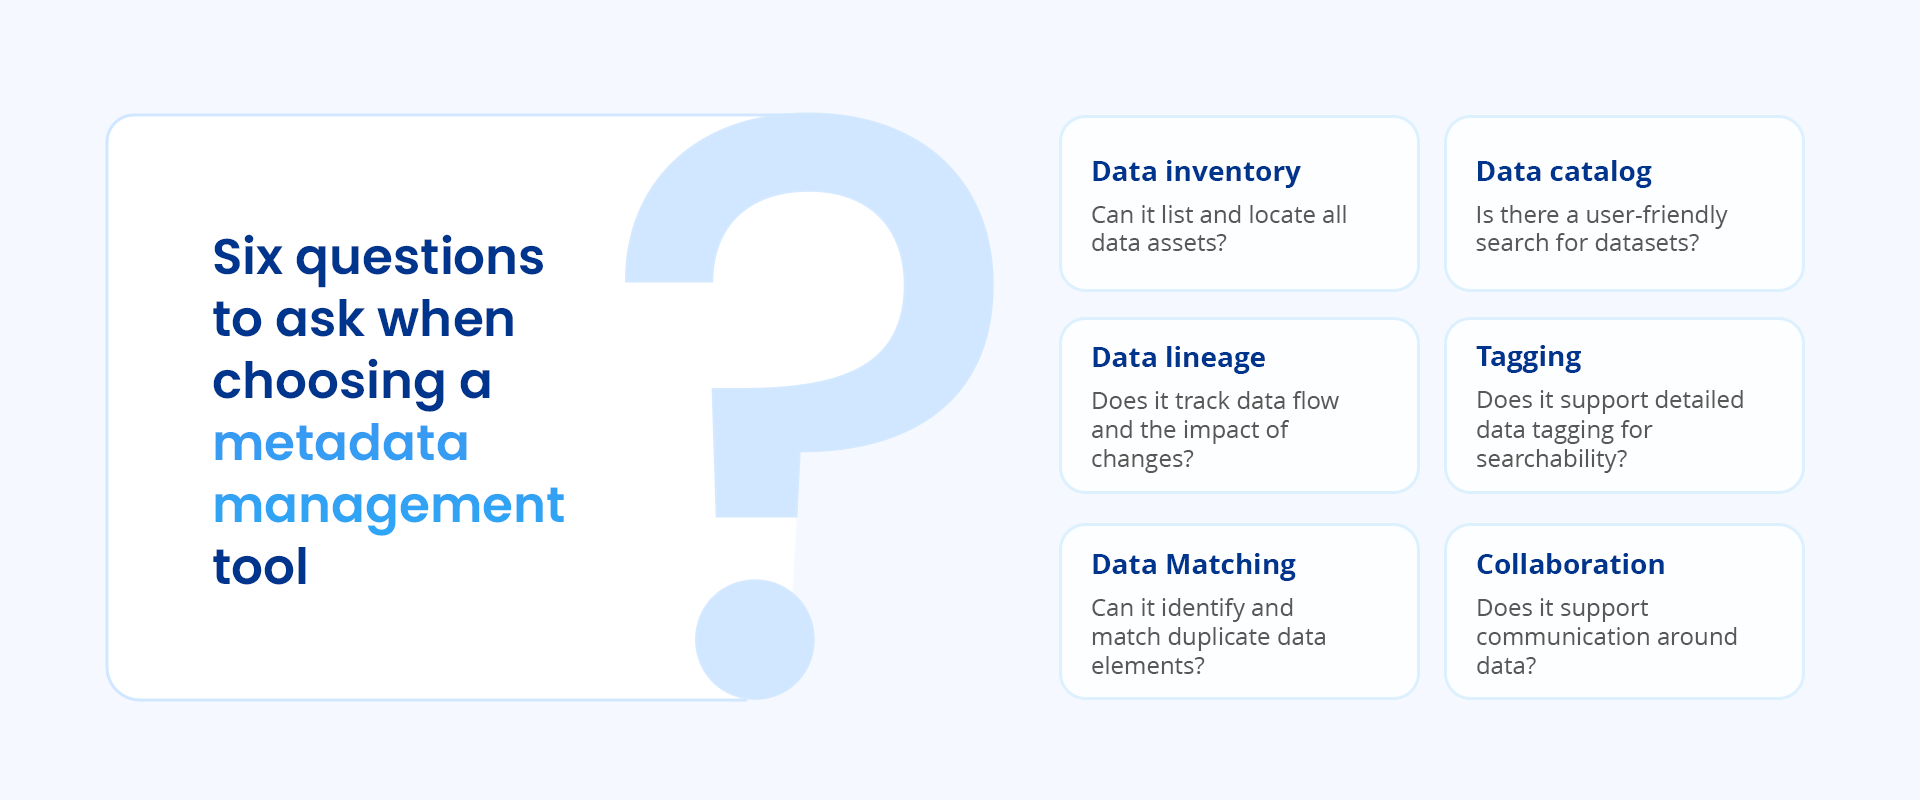 Six questions to ask when choosing a metadata management tool. Image by Astera.